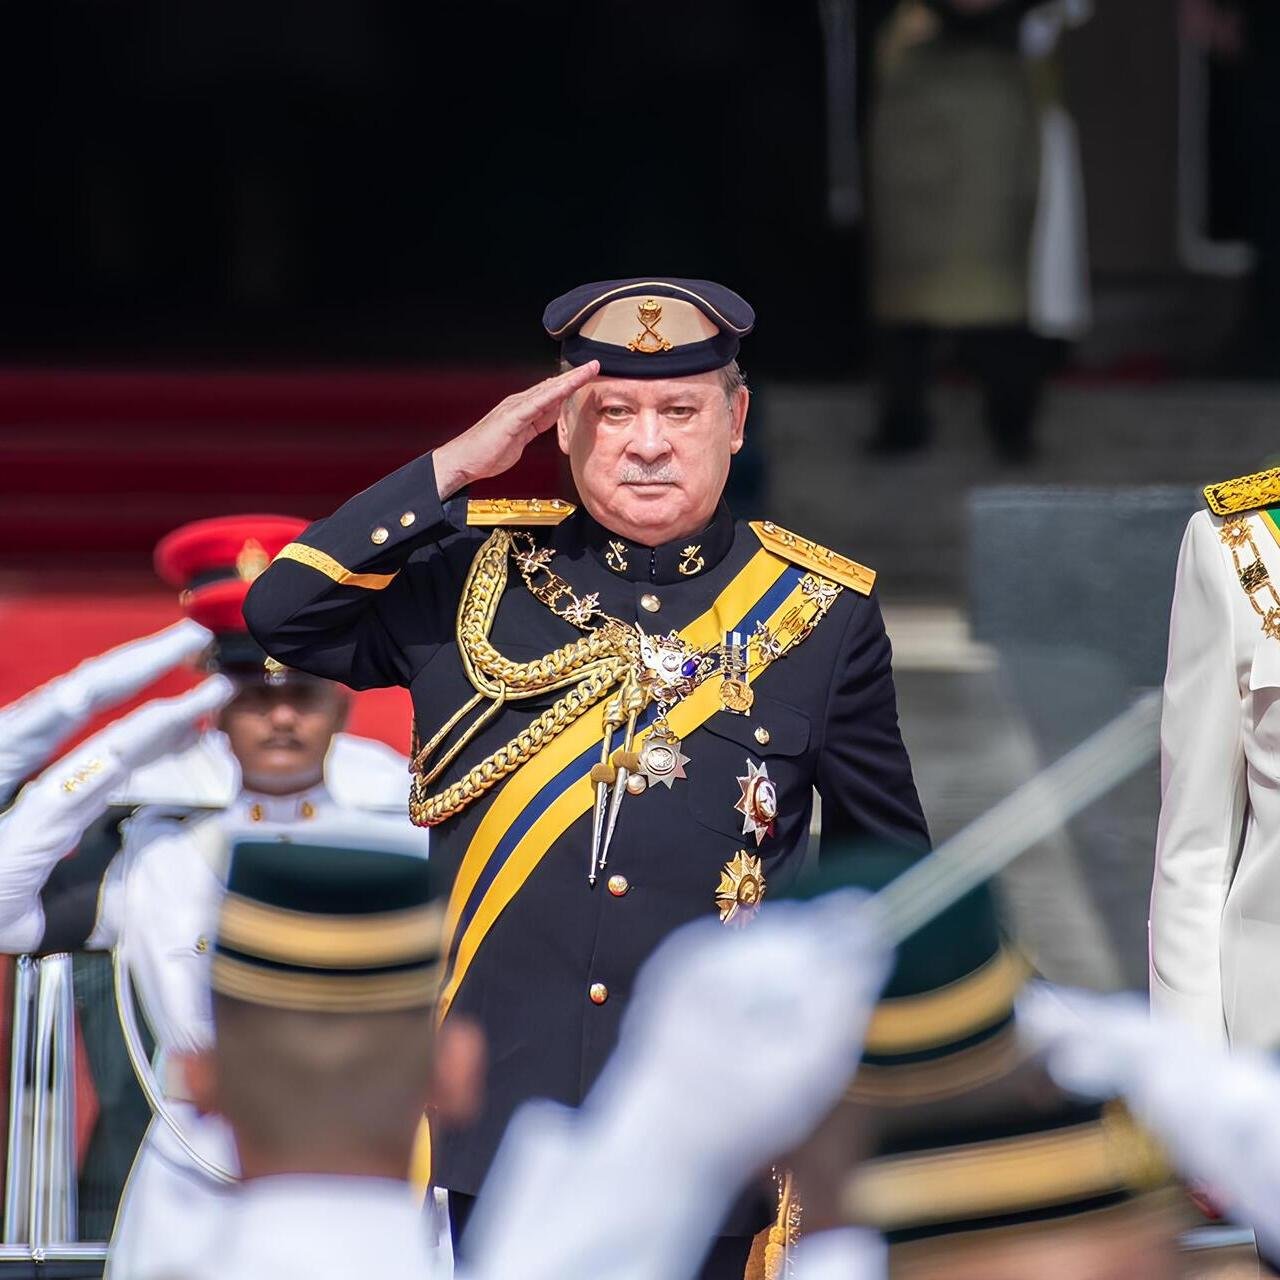 Issues to Know About His Majesty Sultan Ibrahim of Johor, Malaysia’s seventeenth Yang di-Pertuan Agong